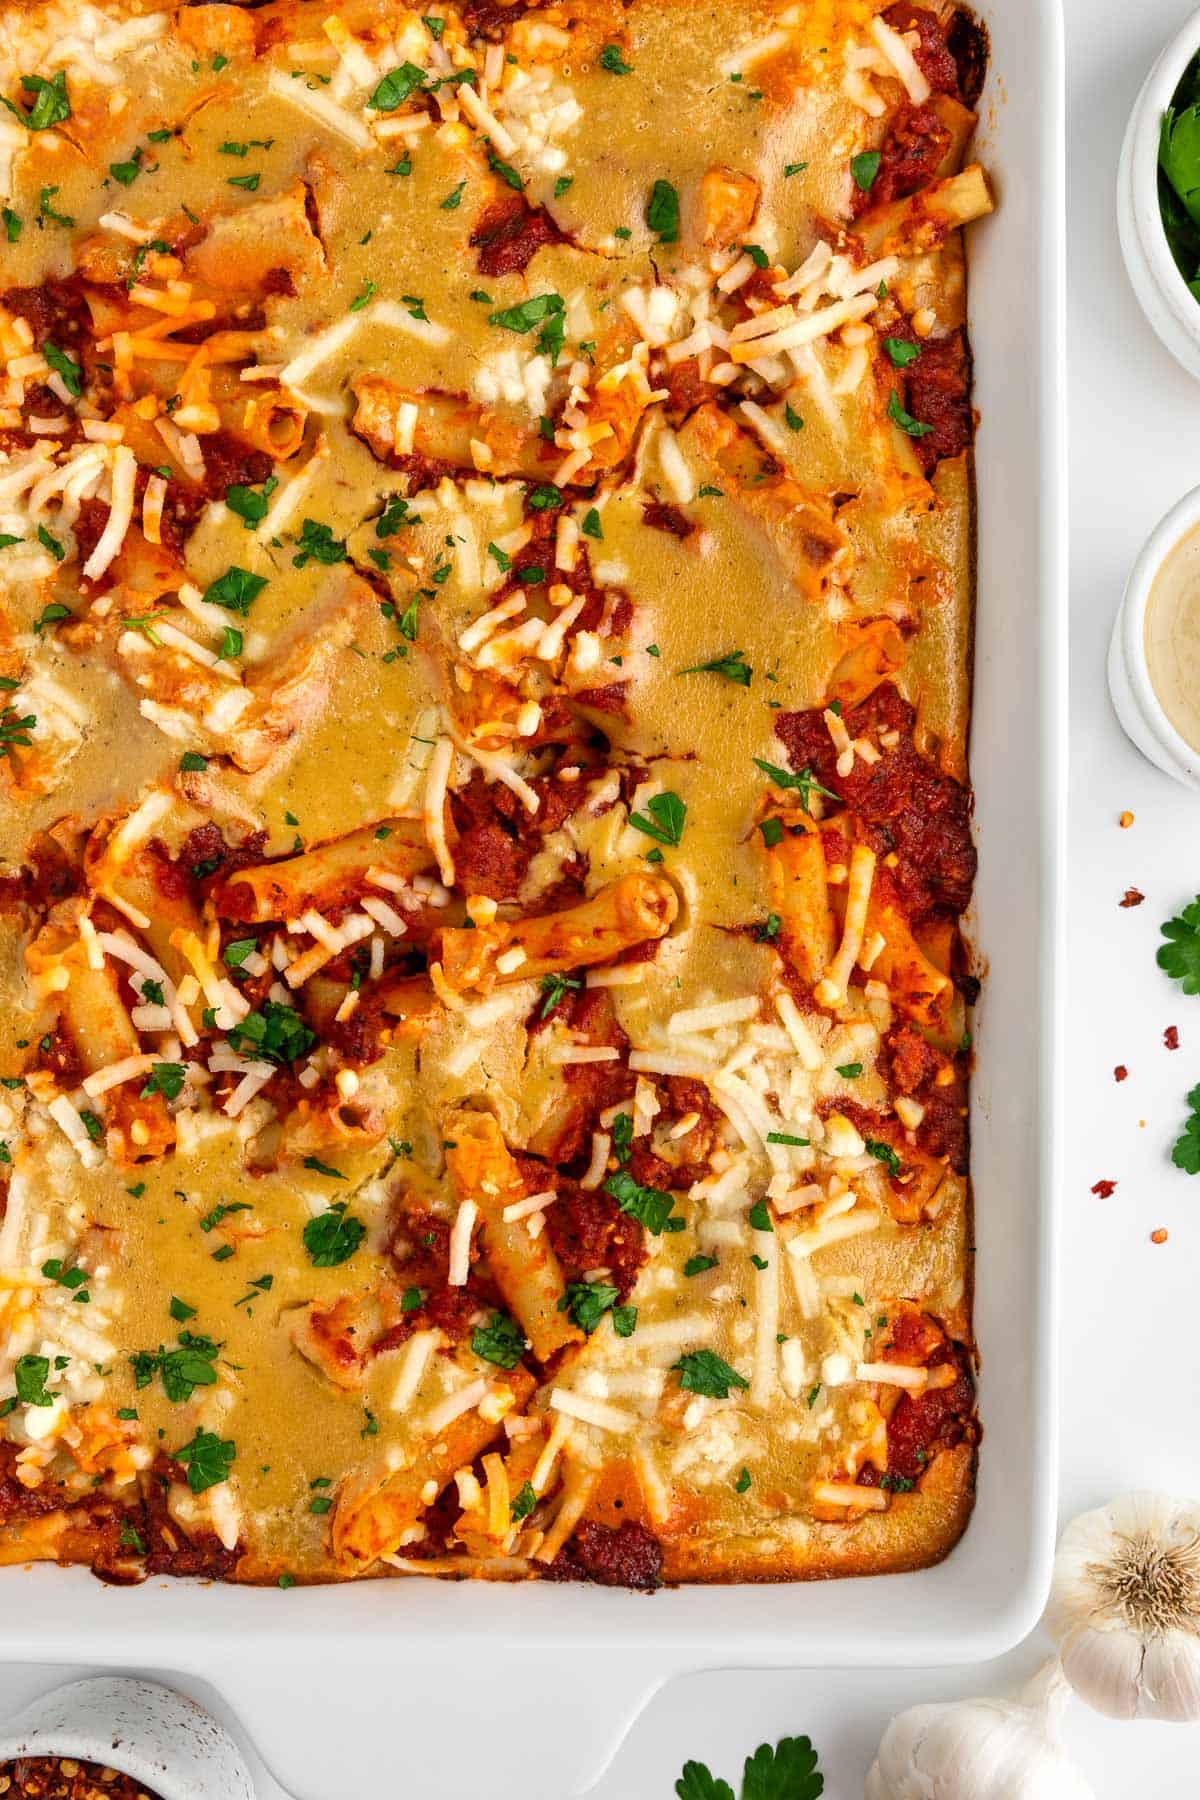 a close up image of vegan baked ziti in a white casserole dish